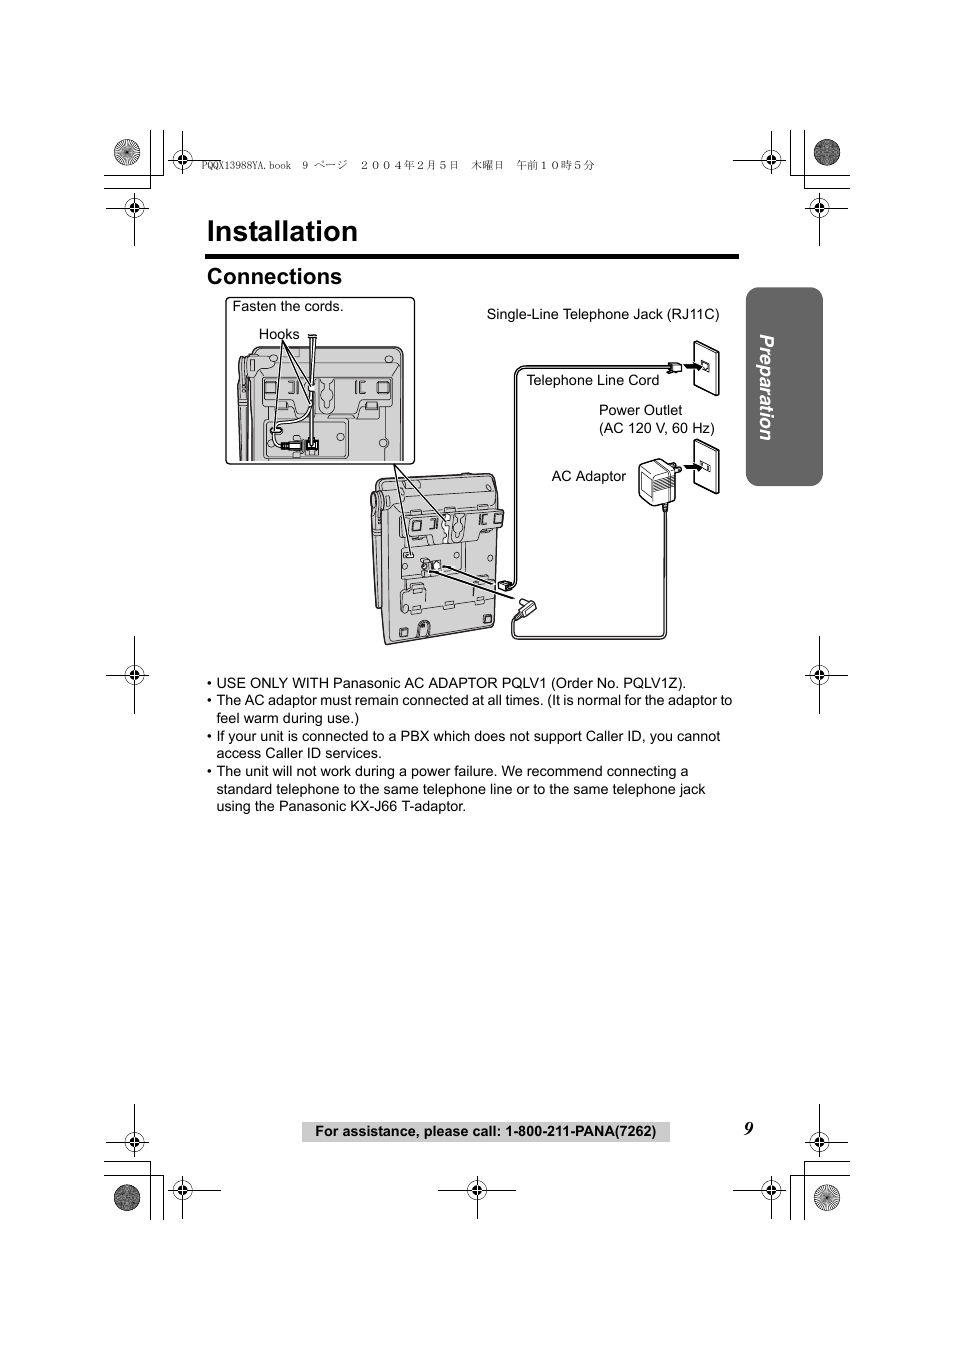 Installation, Connections | Panasonic KX-TG2356 User Manual | Page 9 / 87